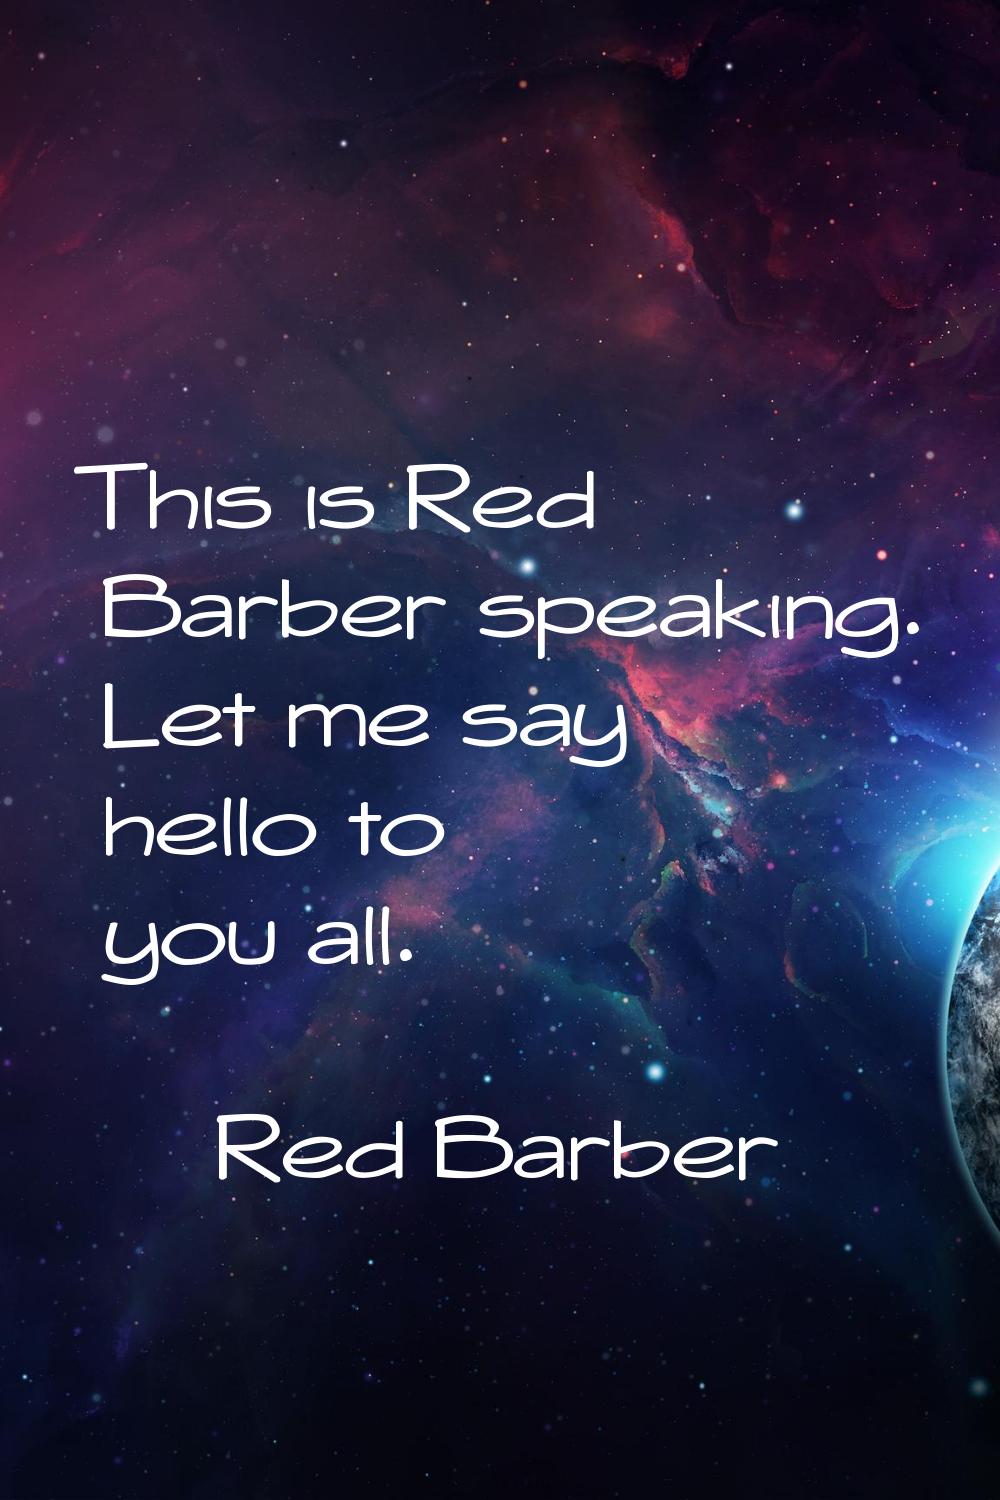 This is Red Barber speaking. Let me say hello to you all.